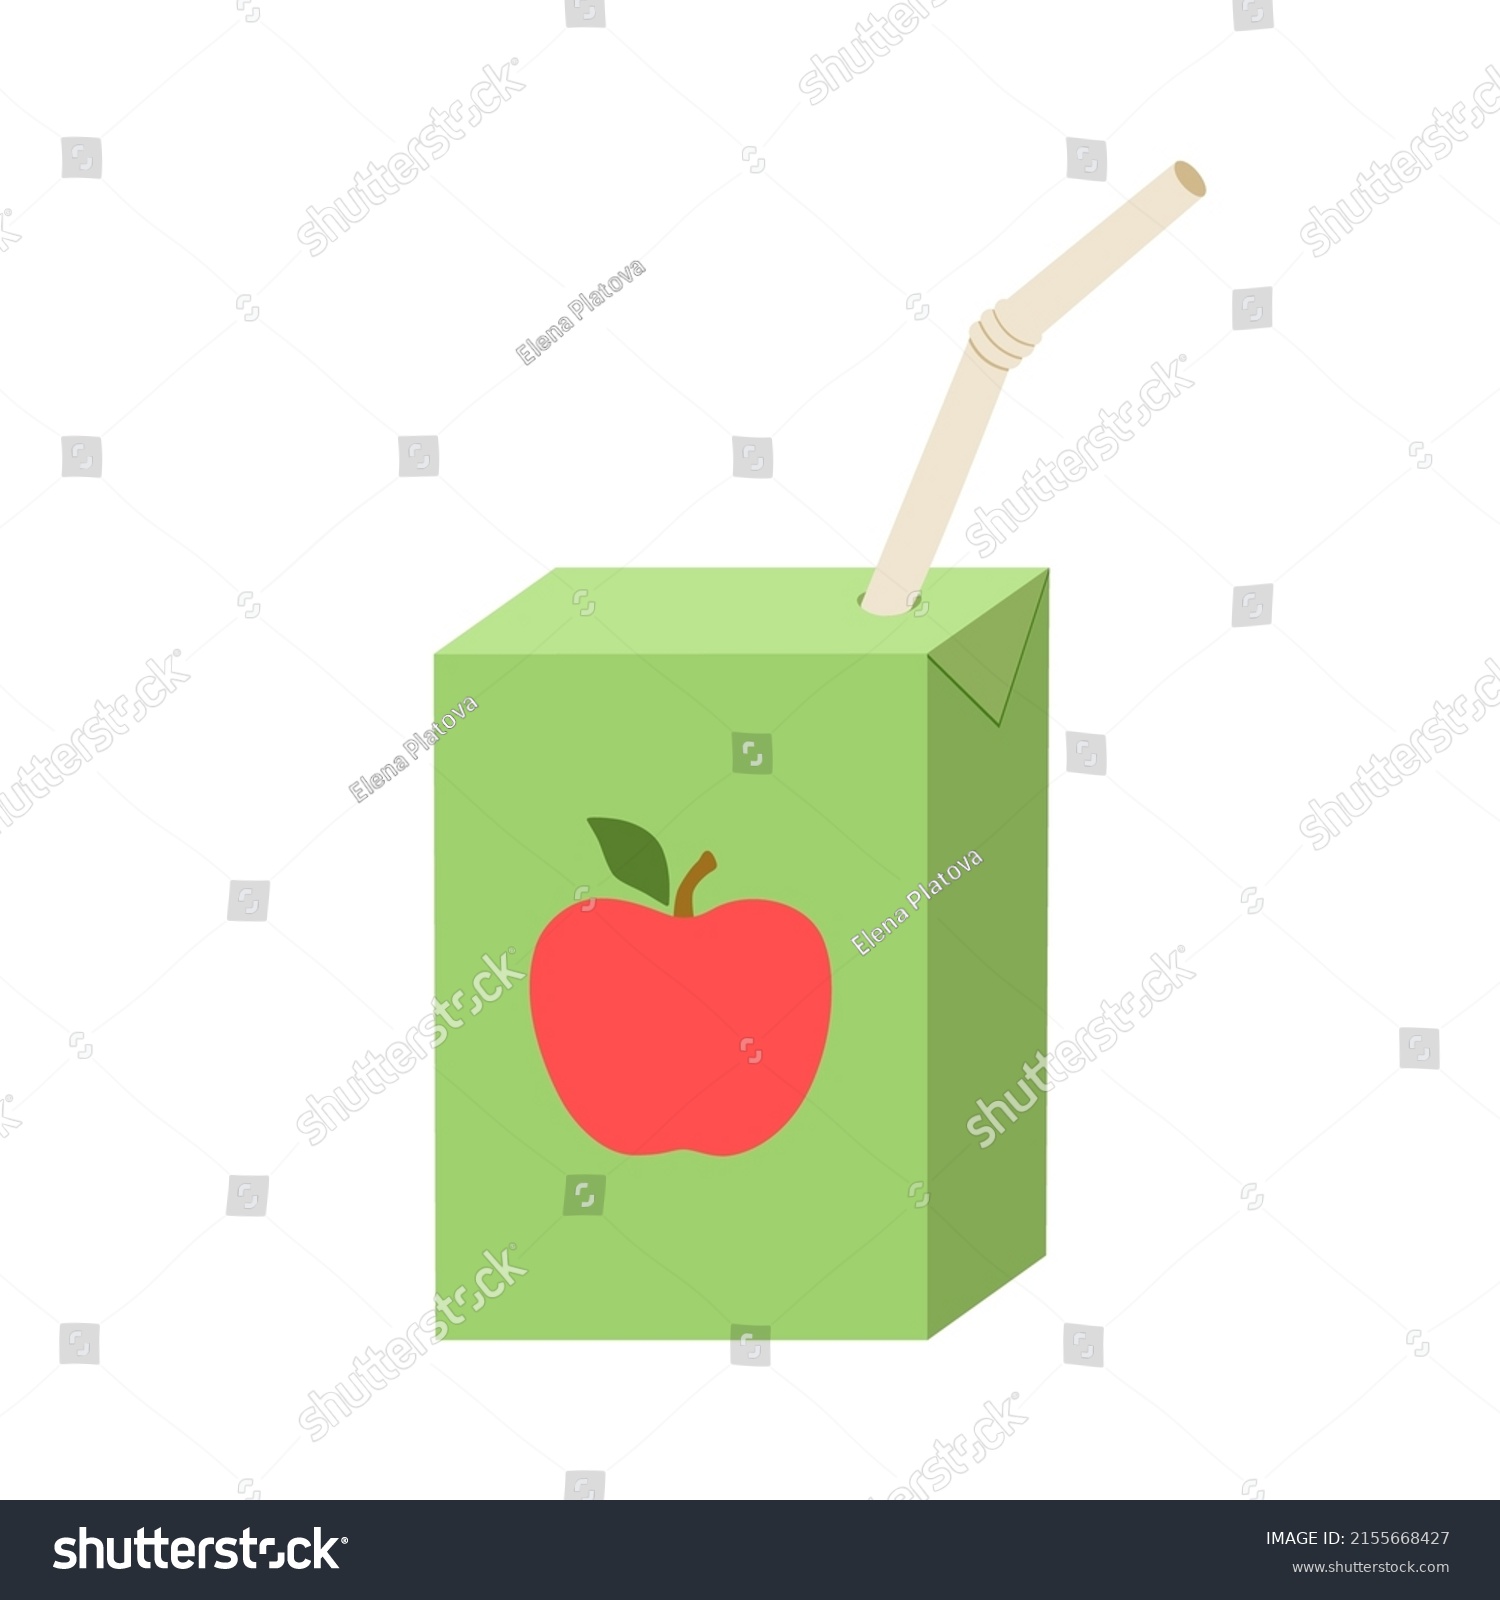 SVG of Apple Juice box flat icon. Simple vector illustration of juice packaging with straw isolated on white background svg